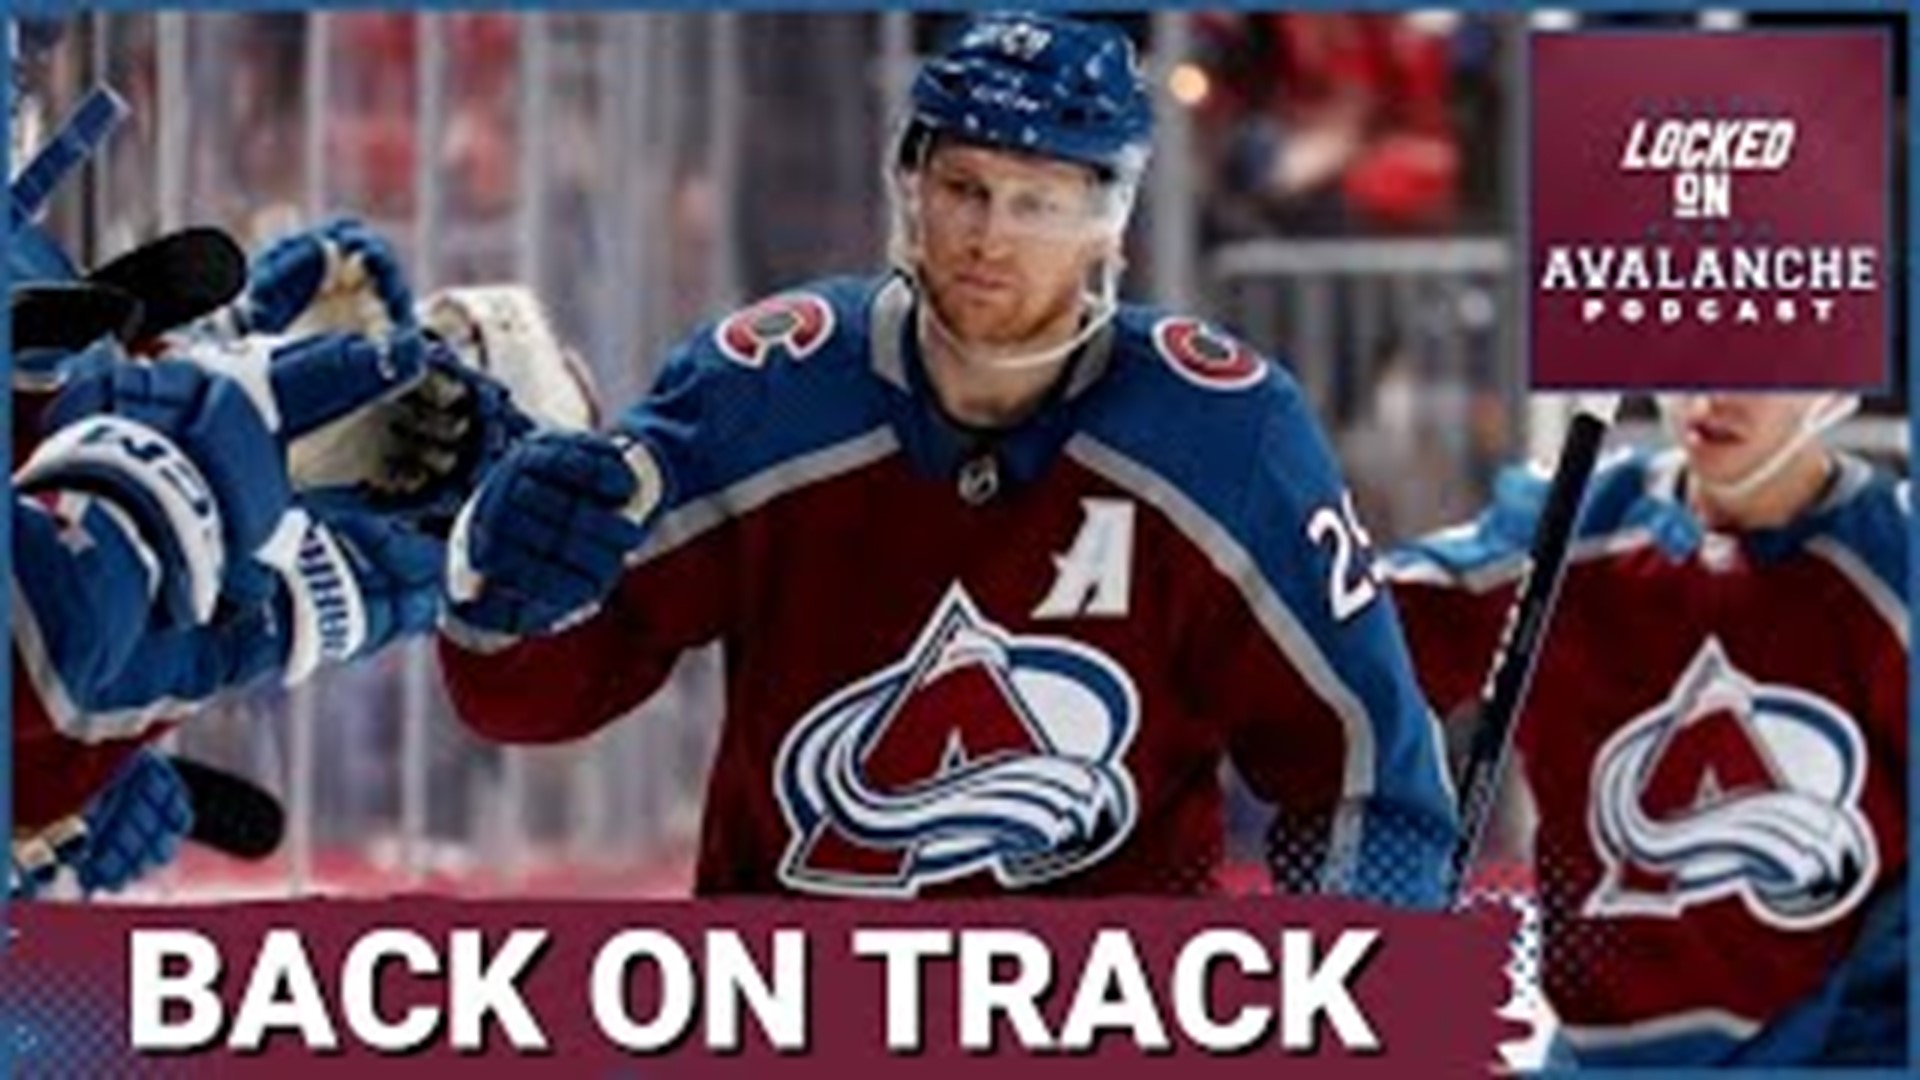 The Avalanche needed to get back on track and they did so in a big way over the past two games.